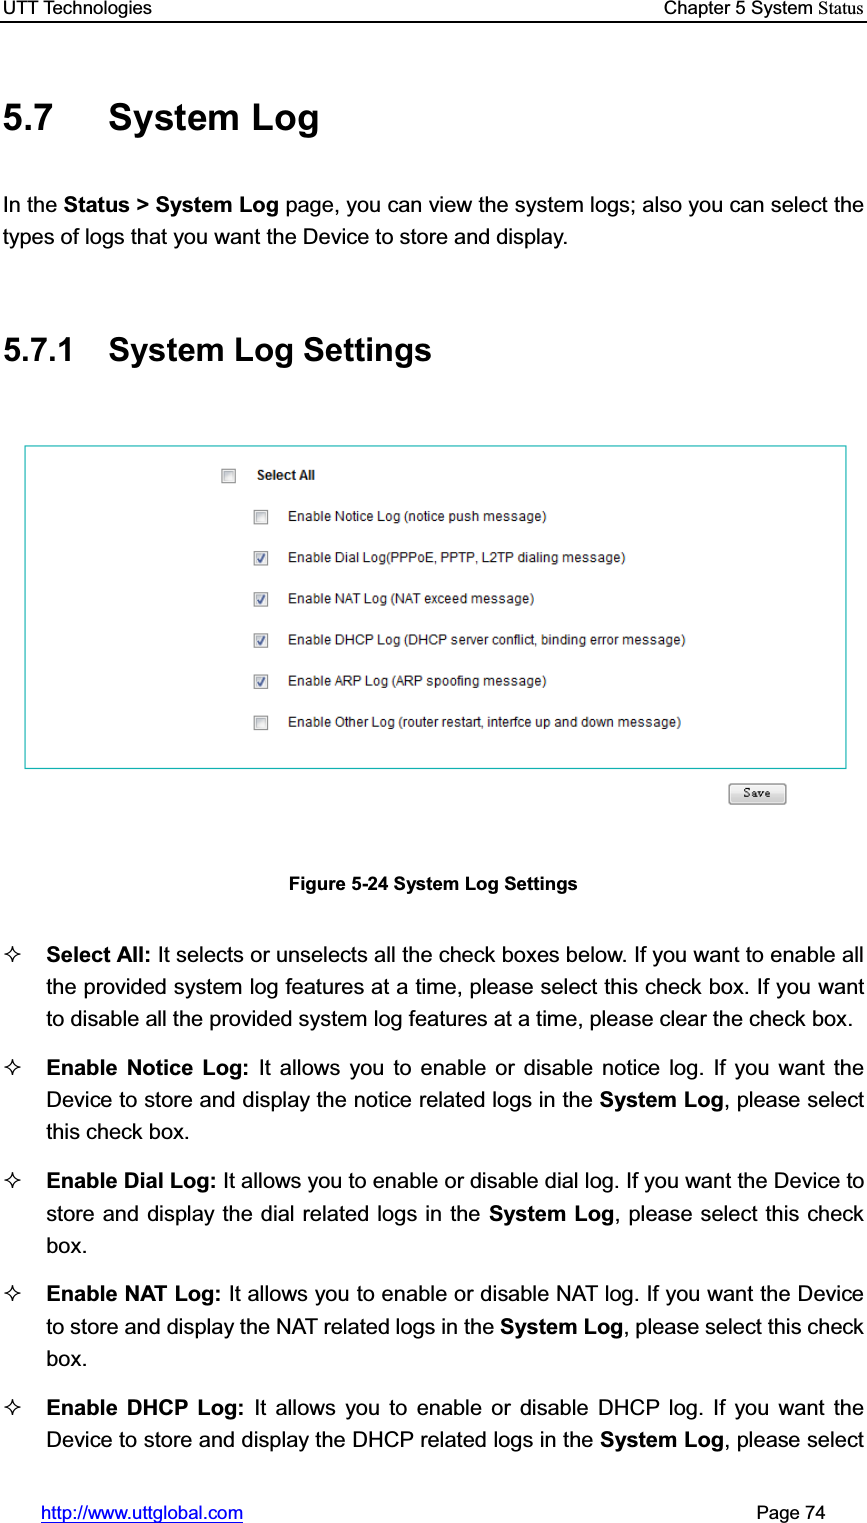 UTT Technologies    Chapter 5 System Statushttp://www.uttglobal.com                                                       Page 74 5.7 System Log In the Status &gt; System Log page, you can view the system logs; also you can select the types of logs that you want the Device to store and display.5.7.1  System Log Settings Figure 5-24 System Log Settings Select All: It selects or unselects all the check boxes below. If you want to enable all the provided system log features at a time, please select this check box. If you want to disable all the provided system log features at a time, please clear the check box.Enable Notice Log: It allows you to enable or disable notice log. If you want the Device to store and display the notice related logs in the System Log, please select this check box. Enable Dial Log: It allows you to enable or disable dial log. If you want the Device to store and display the dial related logs in the System Log, please select this check box.Enable NAT Log: It allows you to enable or disable NAT log. If you want the Device to store and display the NAT related logs in the System Log, please select this check box.Enable DHCP Log: It allows you to enable or disable DHCP log. If you want the Device to store and display the DHCP related logs in the System Log, please select 